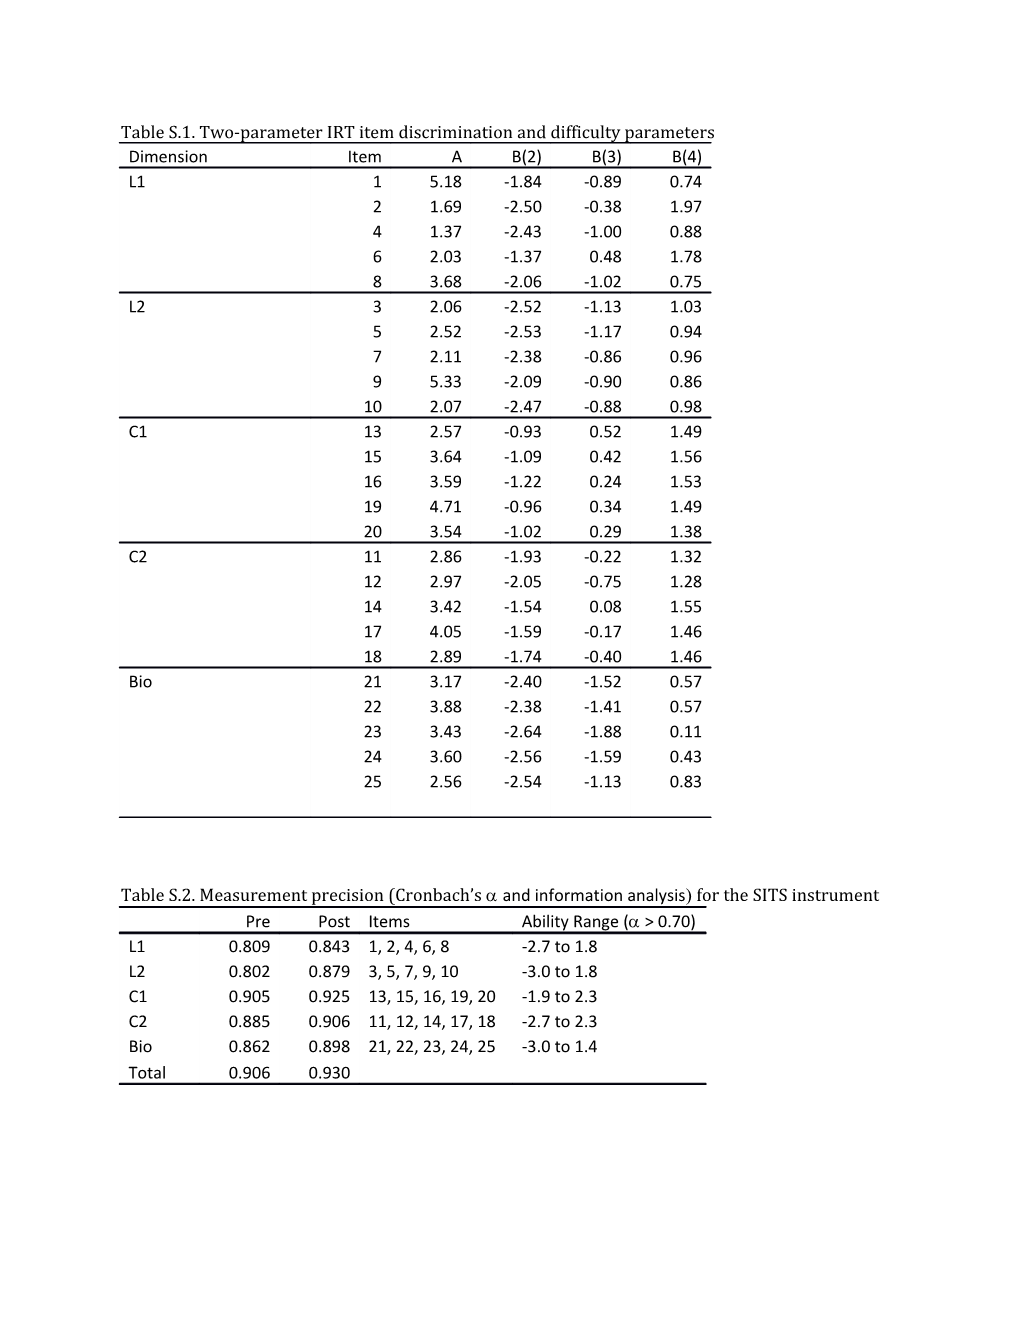 Table S.1. Two-Parameter IRT Item Discrimination and Difficulty Parameters